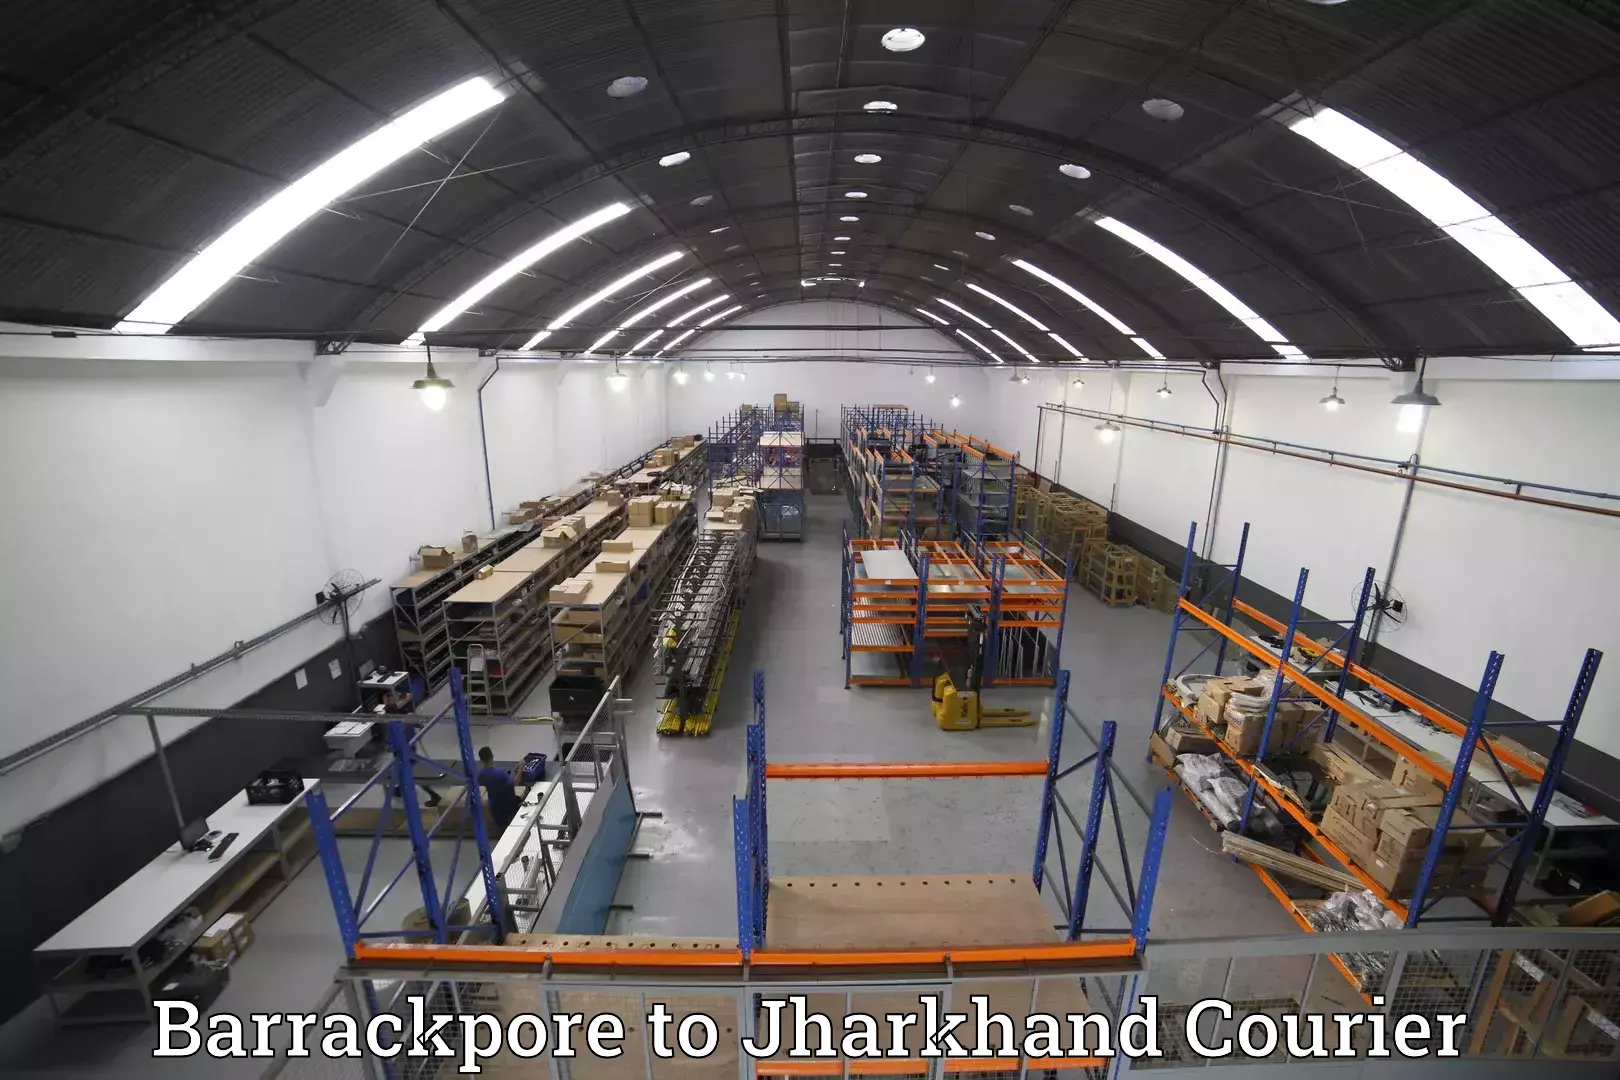 Hassle-free luggage shipping in Barrackpore to Gobindpur